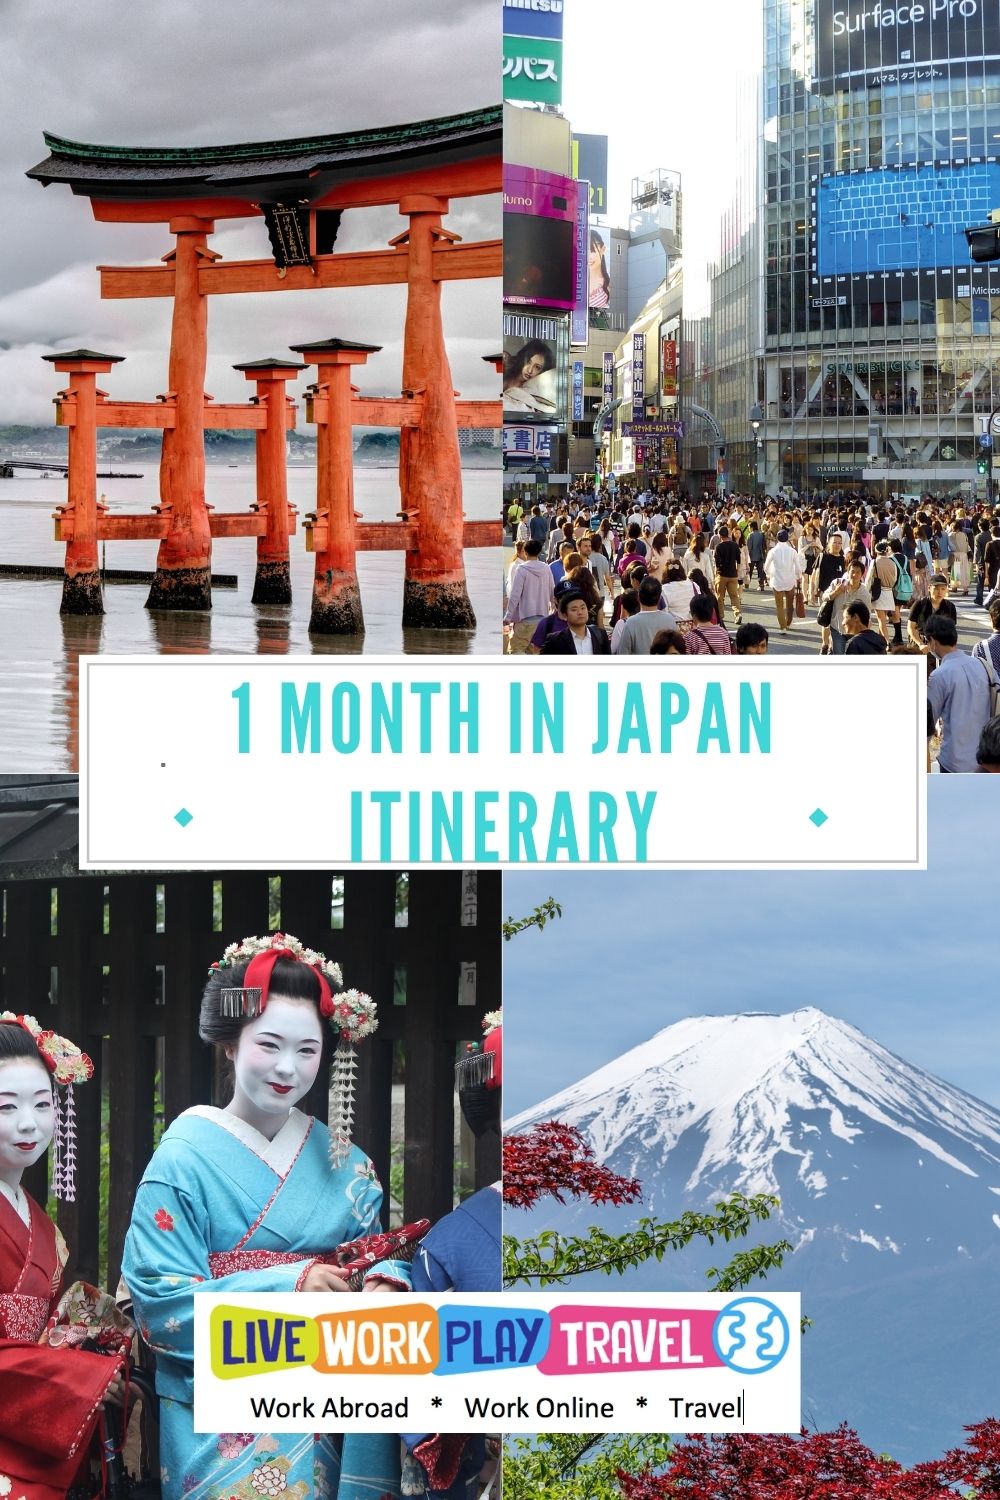 One Month Japan Itinerary Will Take You To Many Places In Japan. You Will See People Dressed In Kimons. Torii Gates. Mt Fuji and Shibuya Crossing In Tokyo.